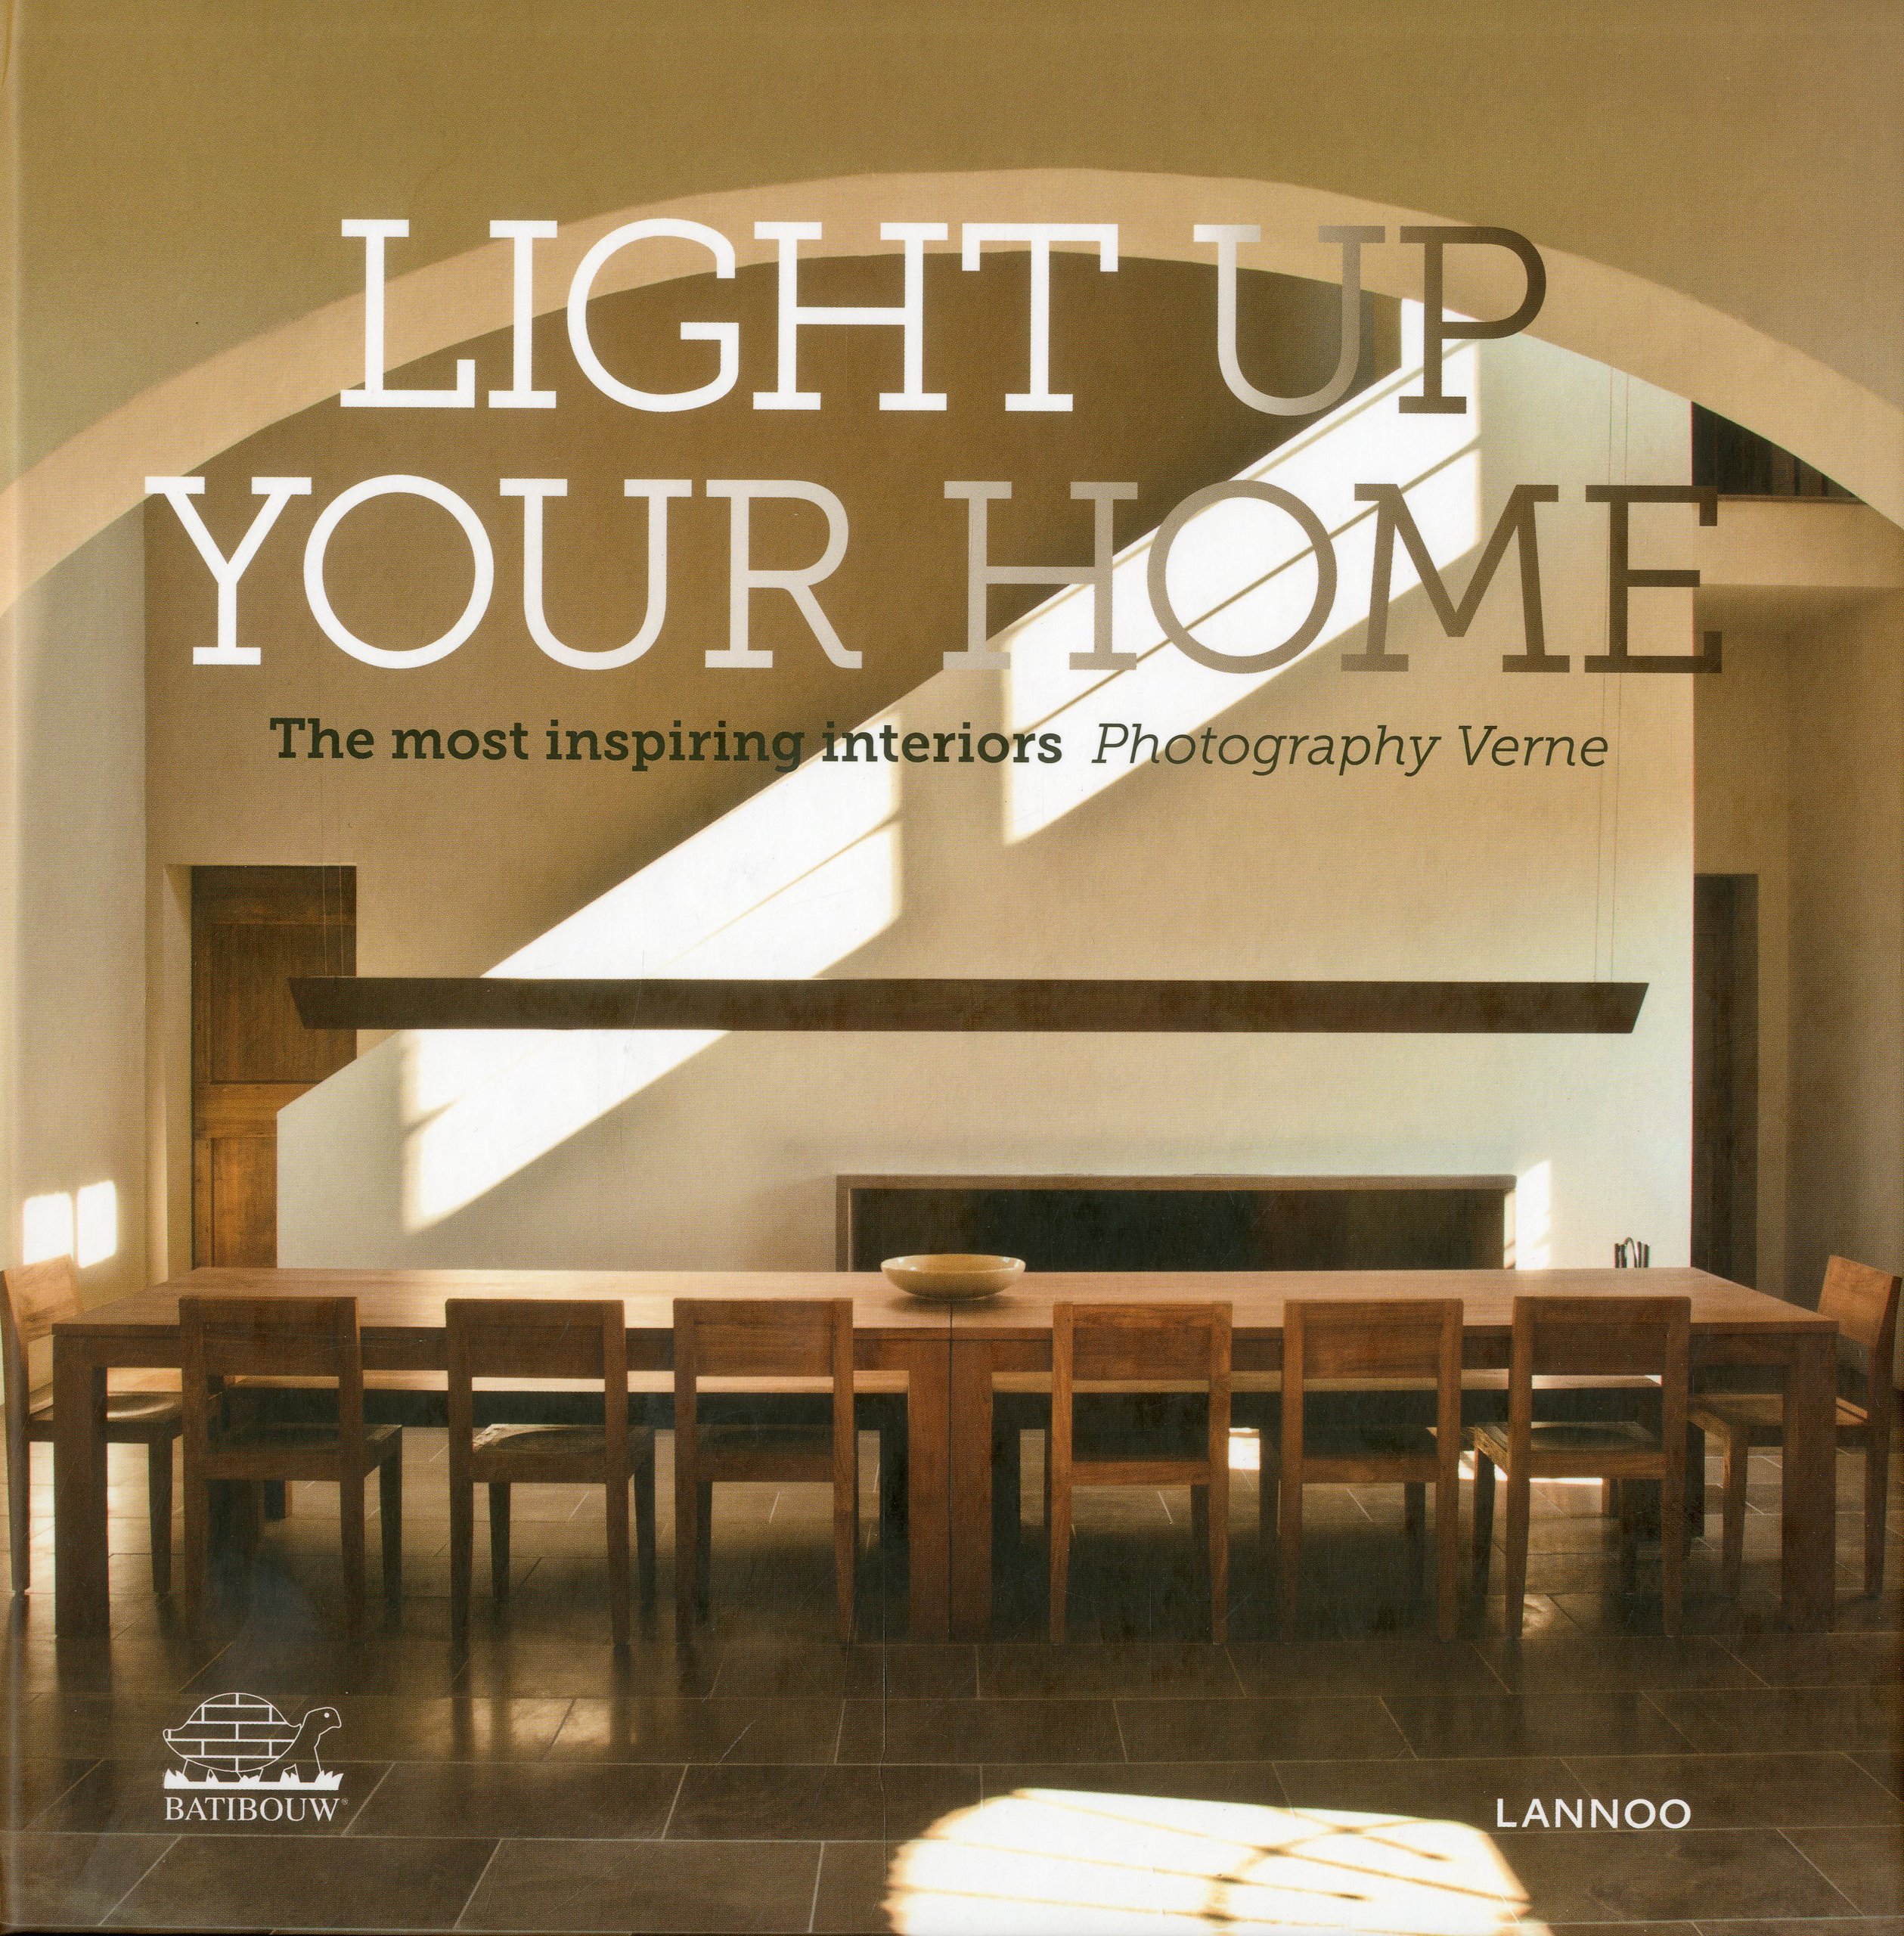 Light up your home